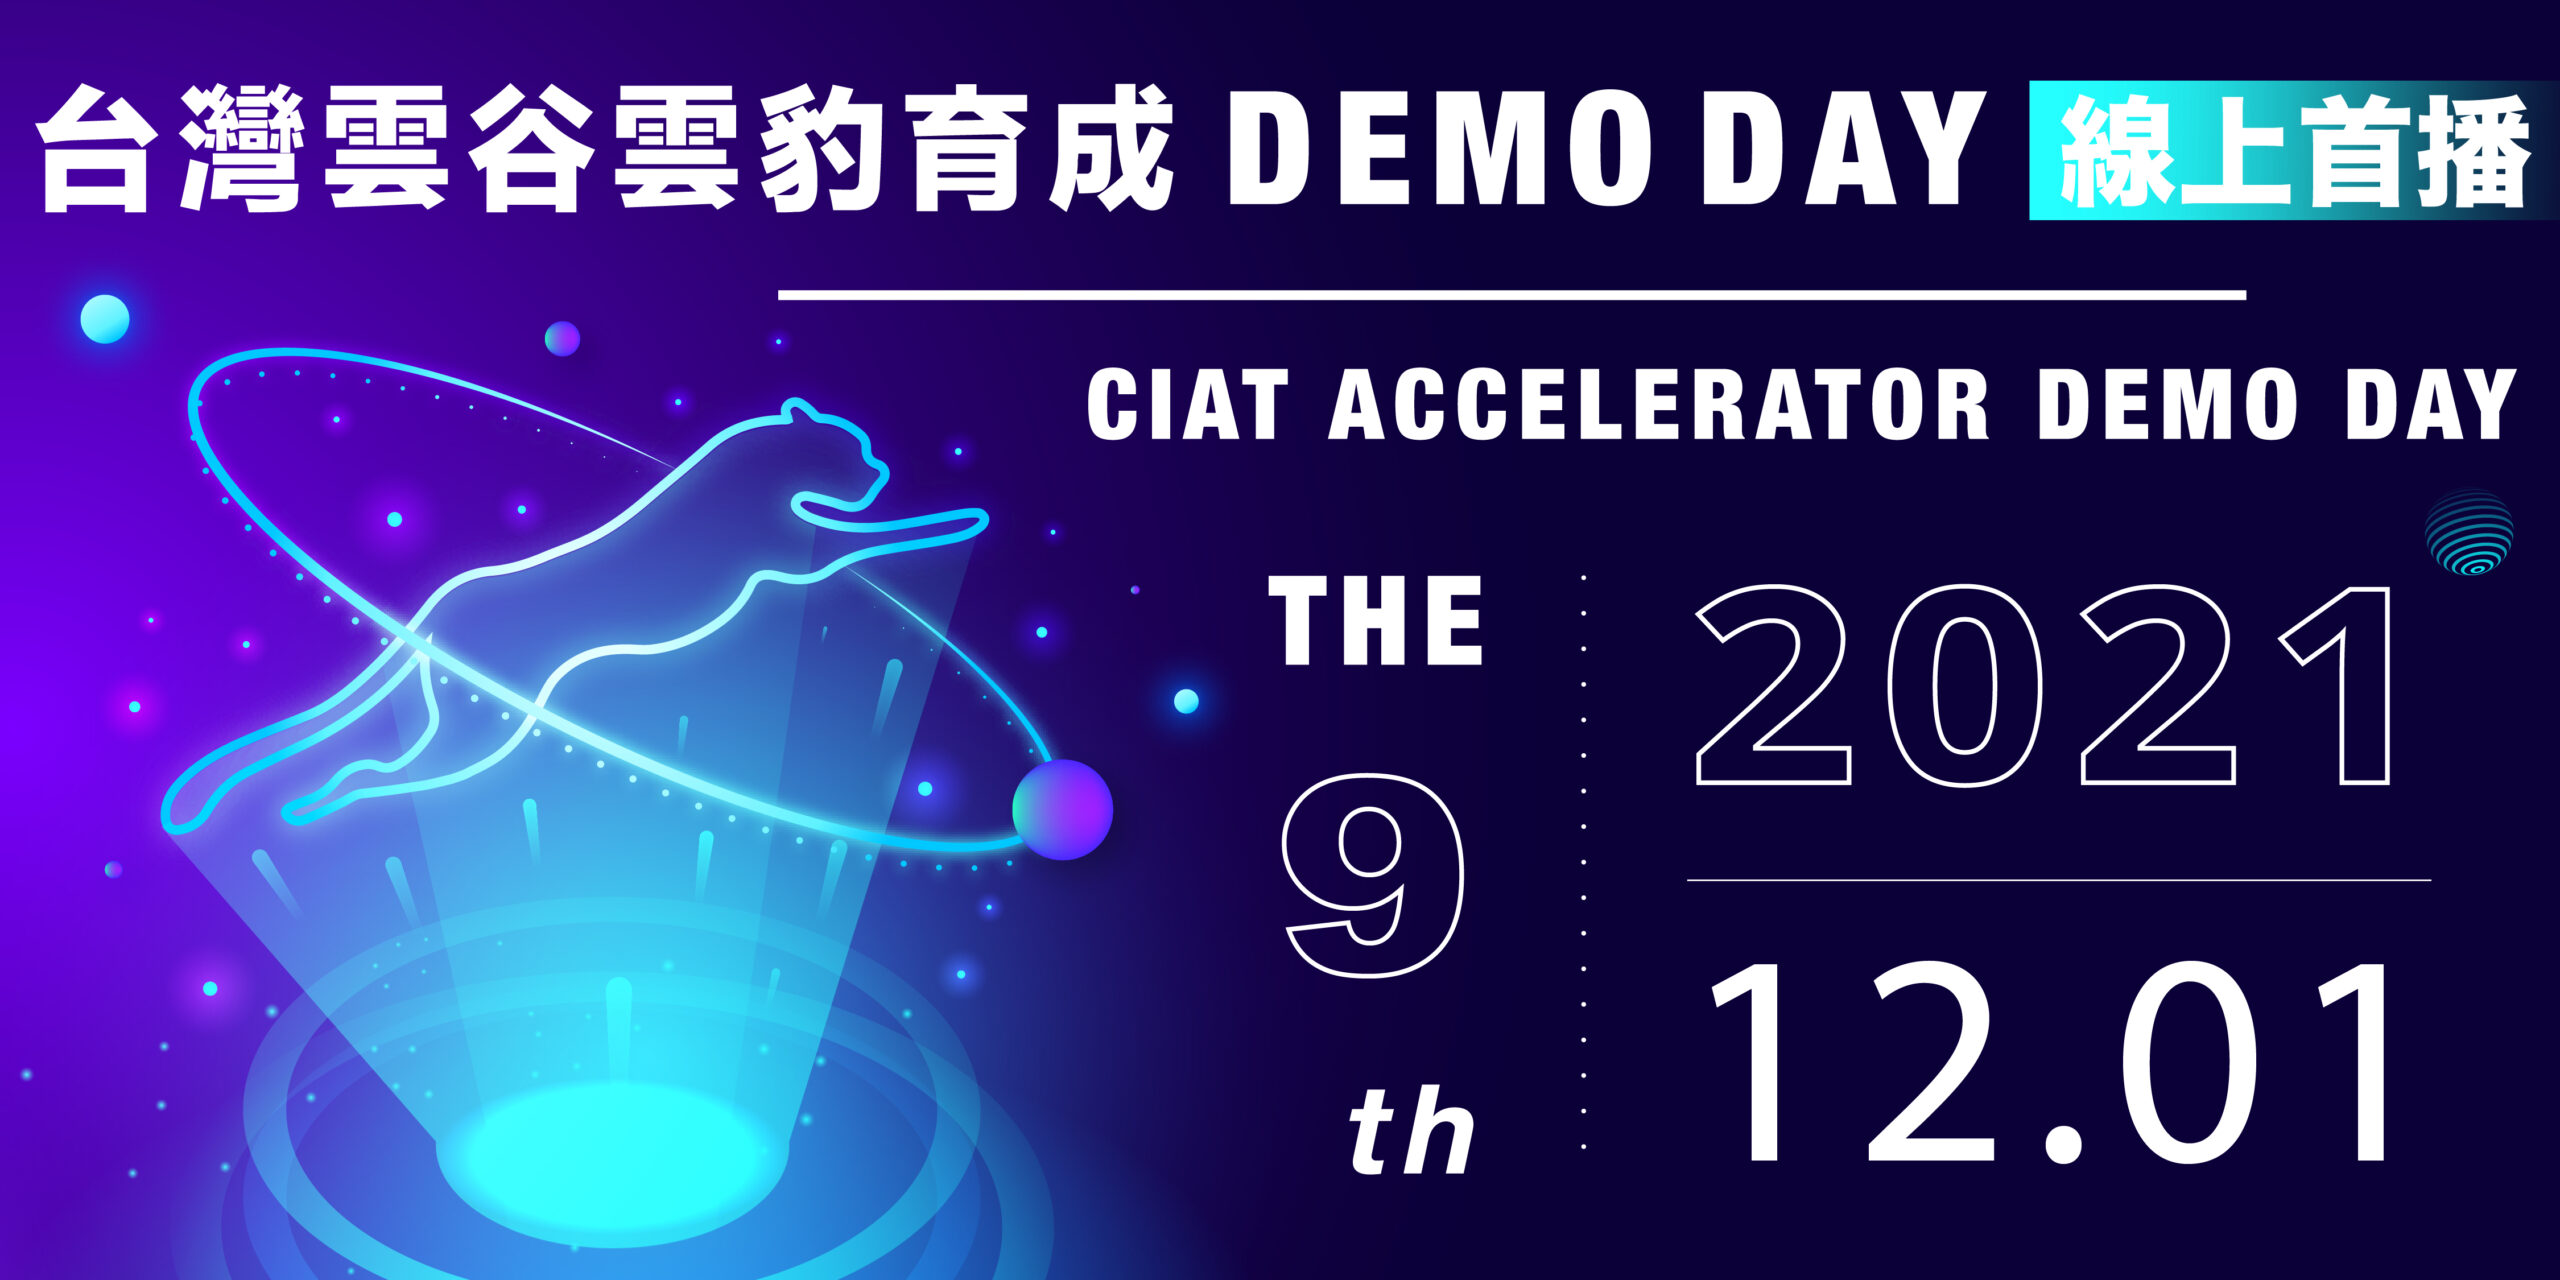 The 9th CIAT Accelerator's Demo Day will be held online in December 1st, 2021.